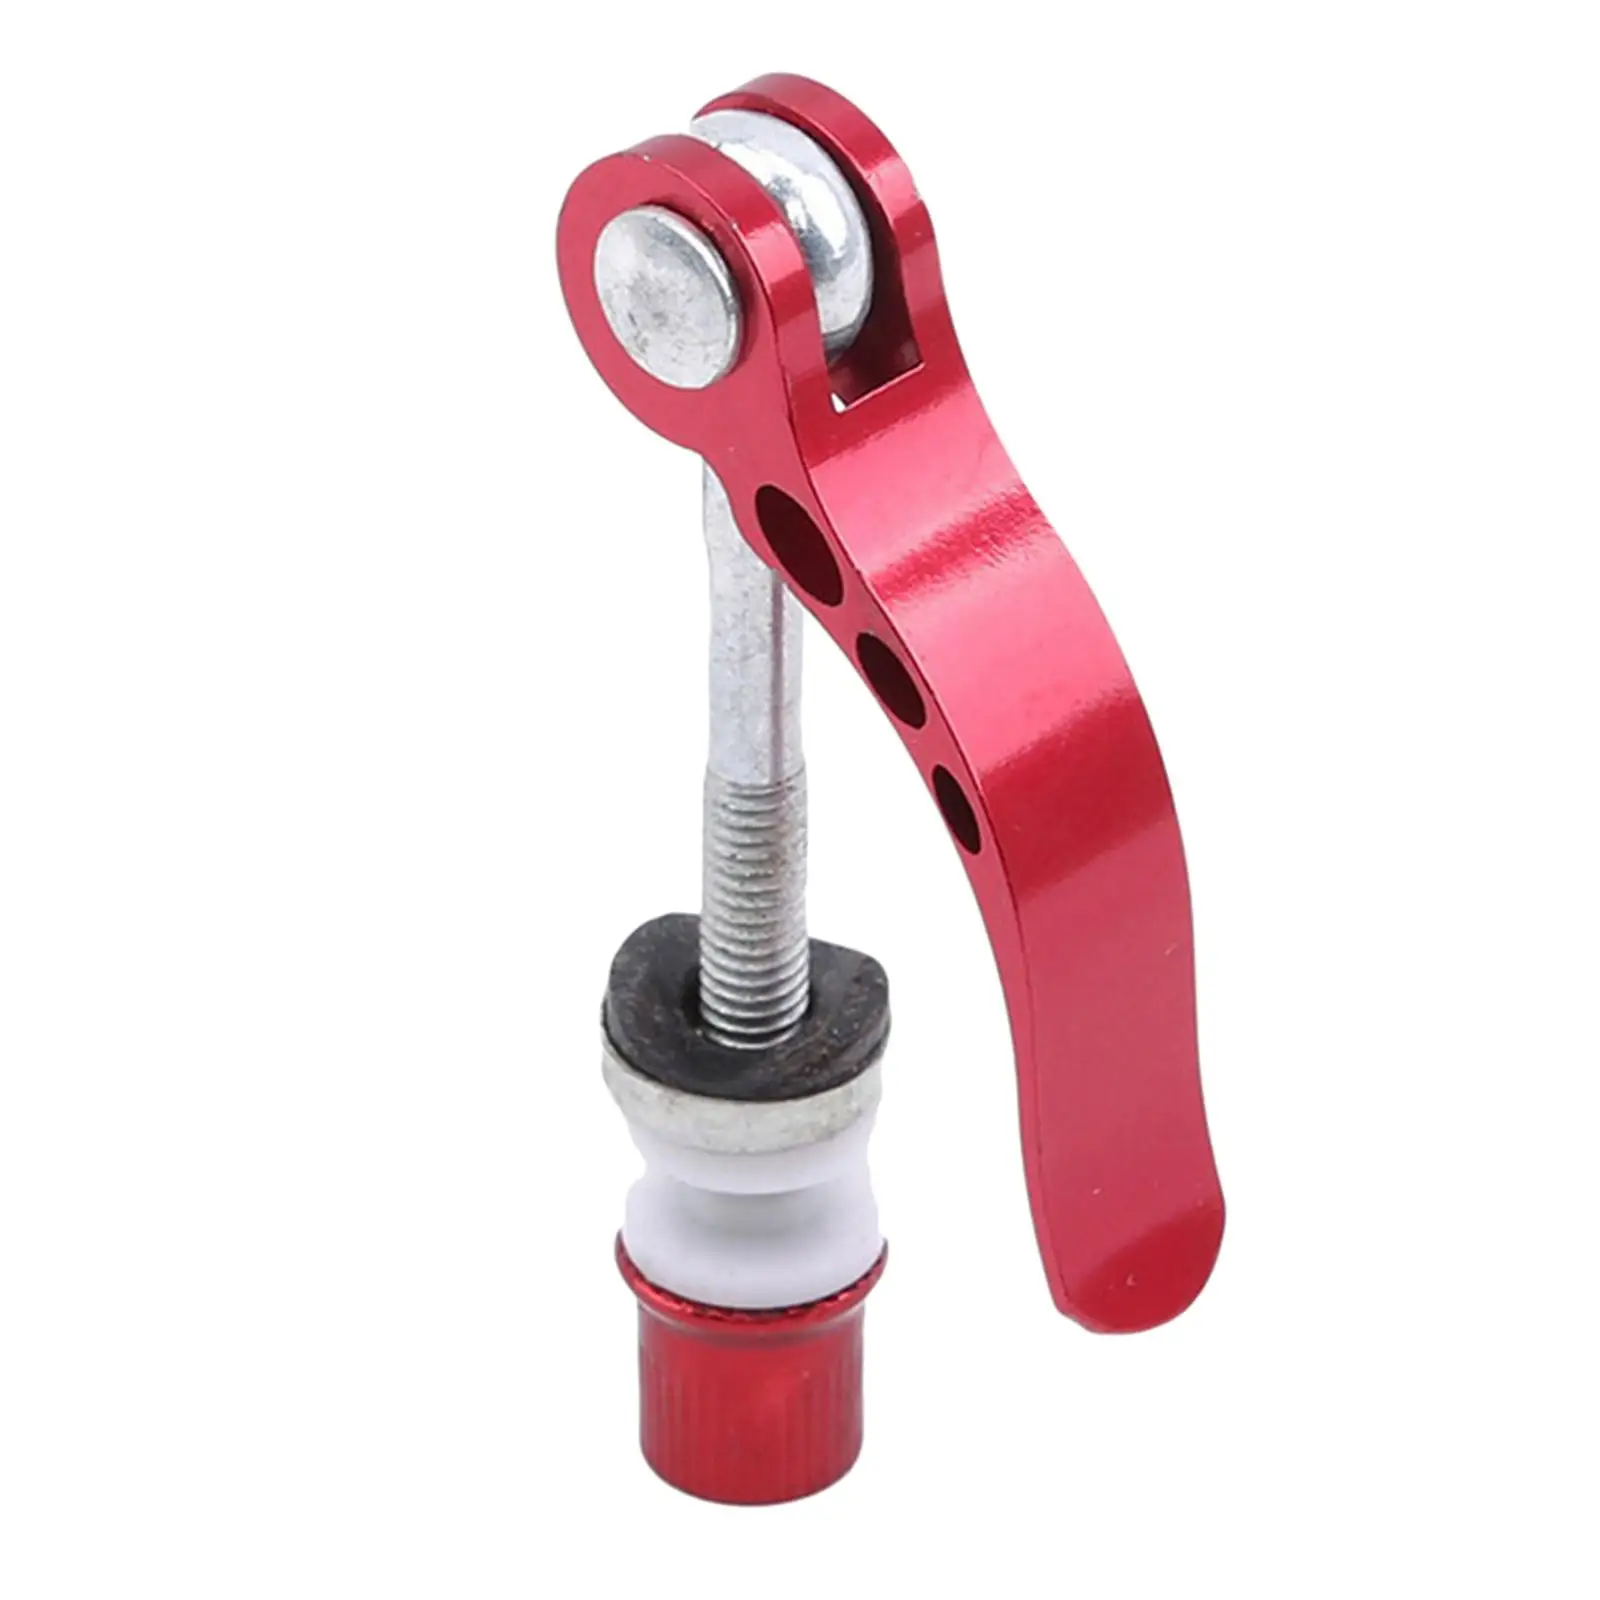 Bicycle Seatpost Clamp, Release Aluminum Bike Seat clip for Mountain Bikes